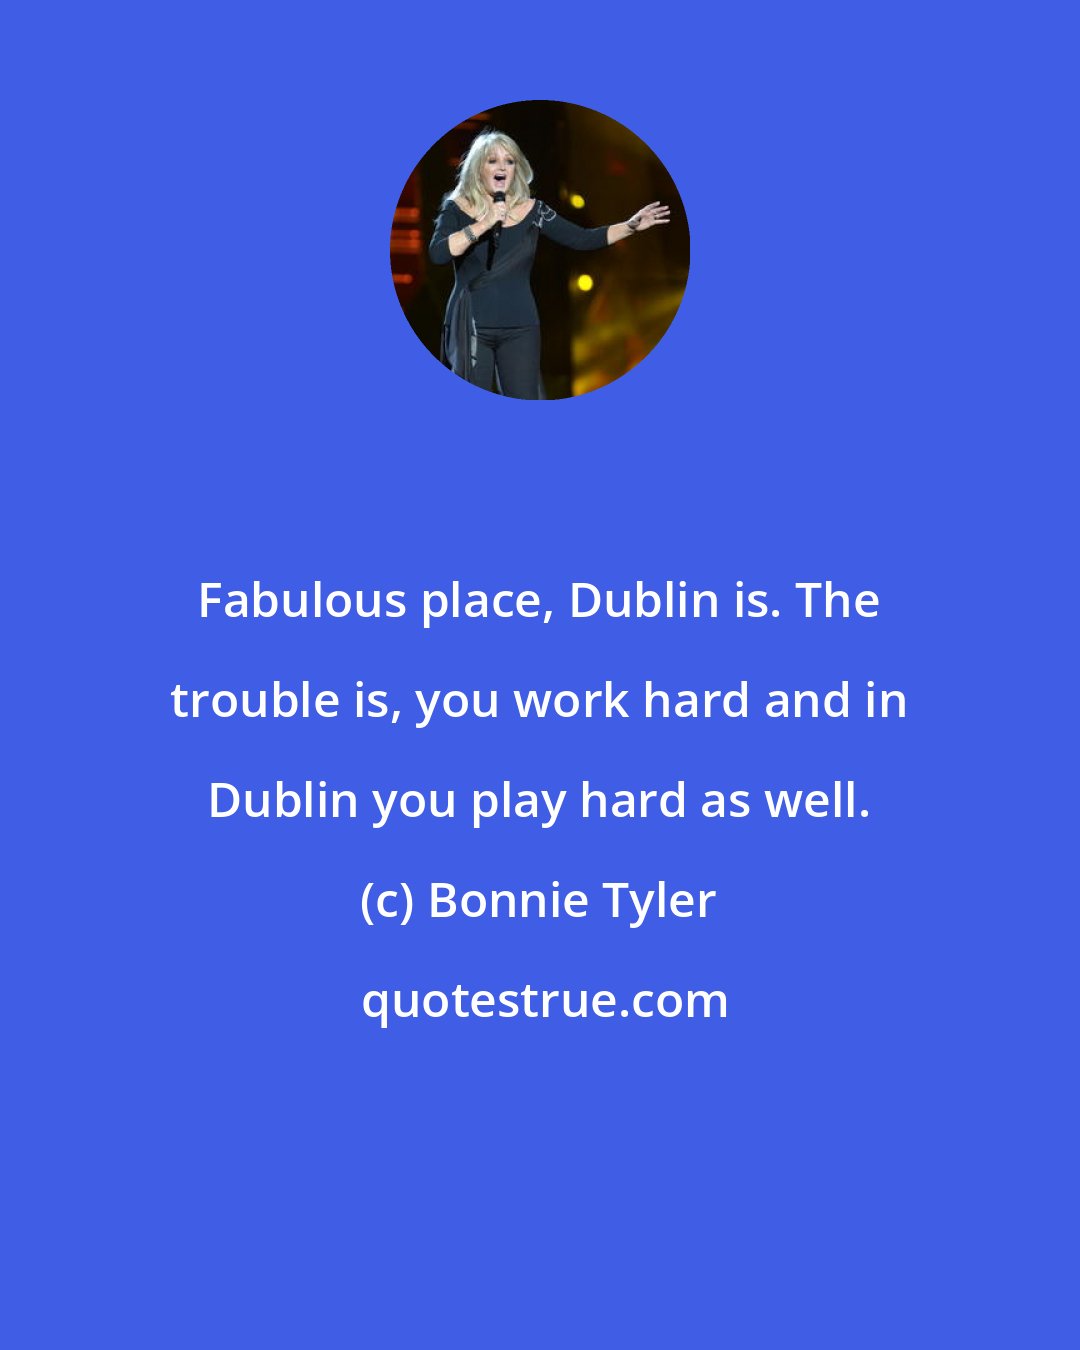 Bonnie Tyler: Fabulous place, Dublin is. The trouble is, you work hard and in Dublin you play hard as well.